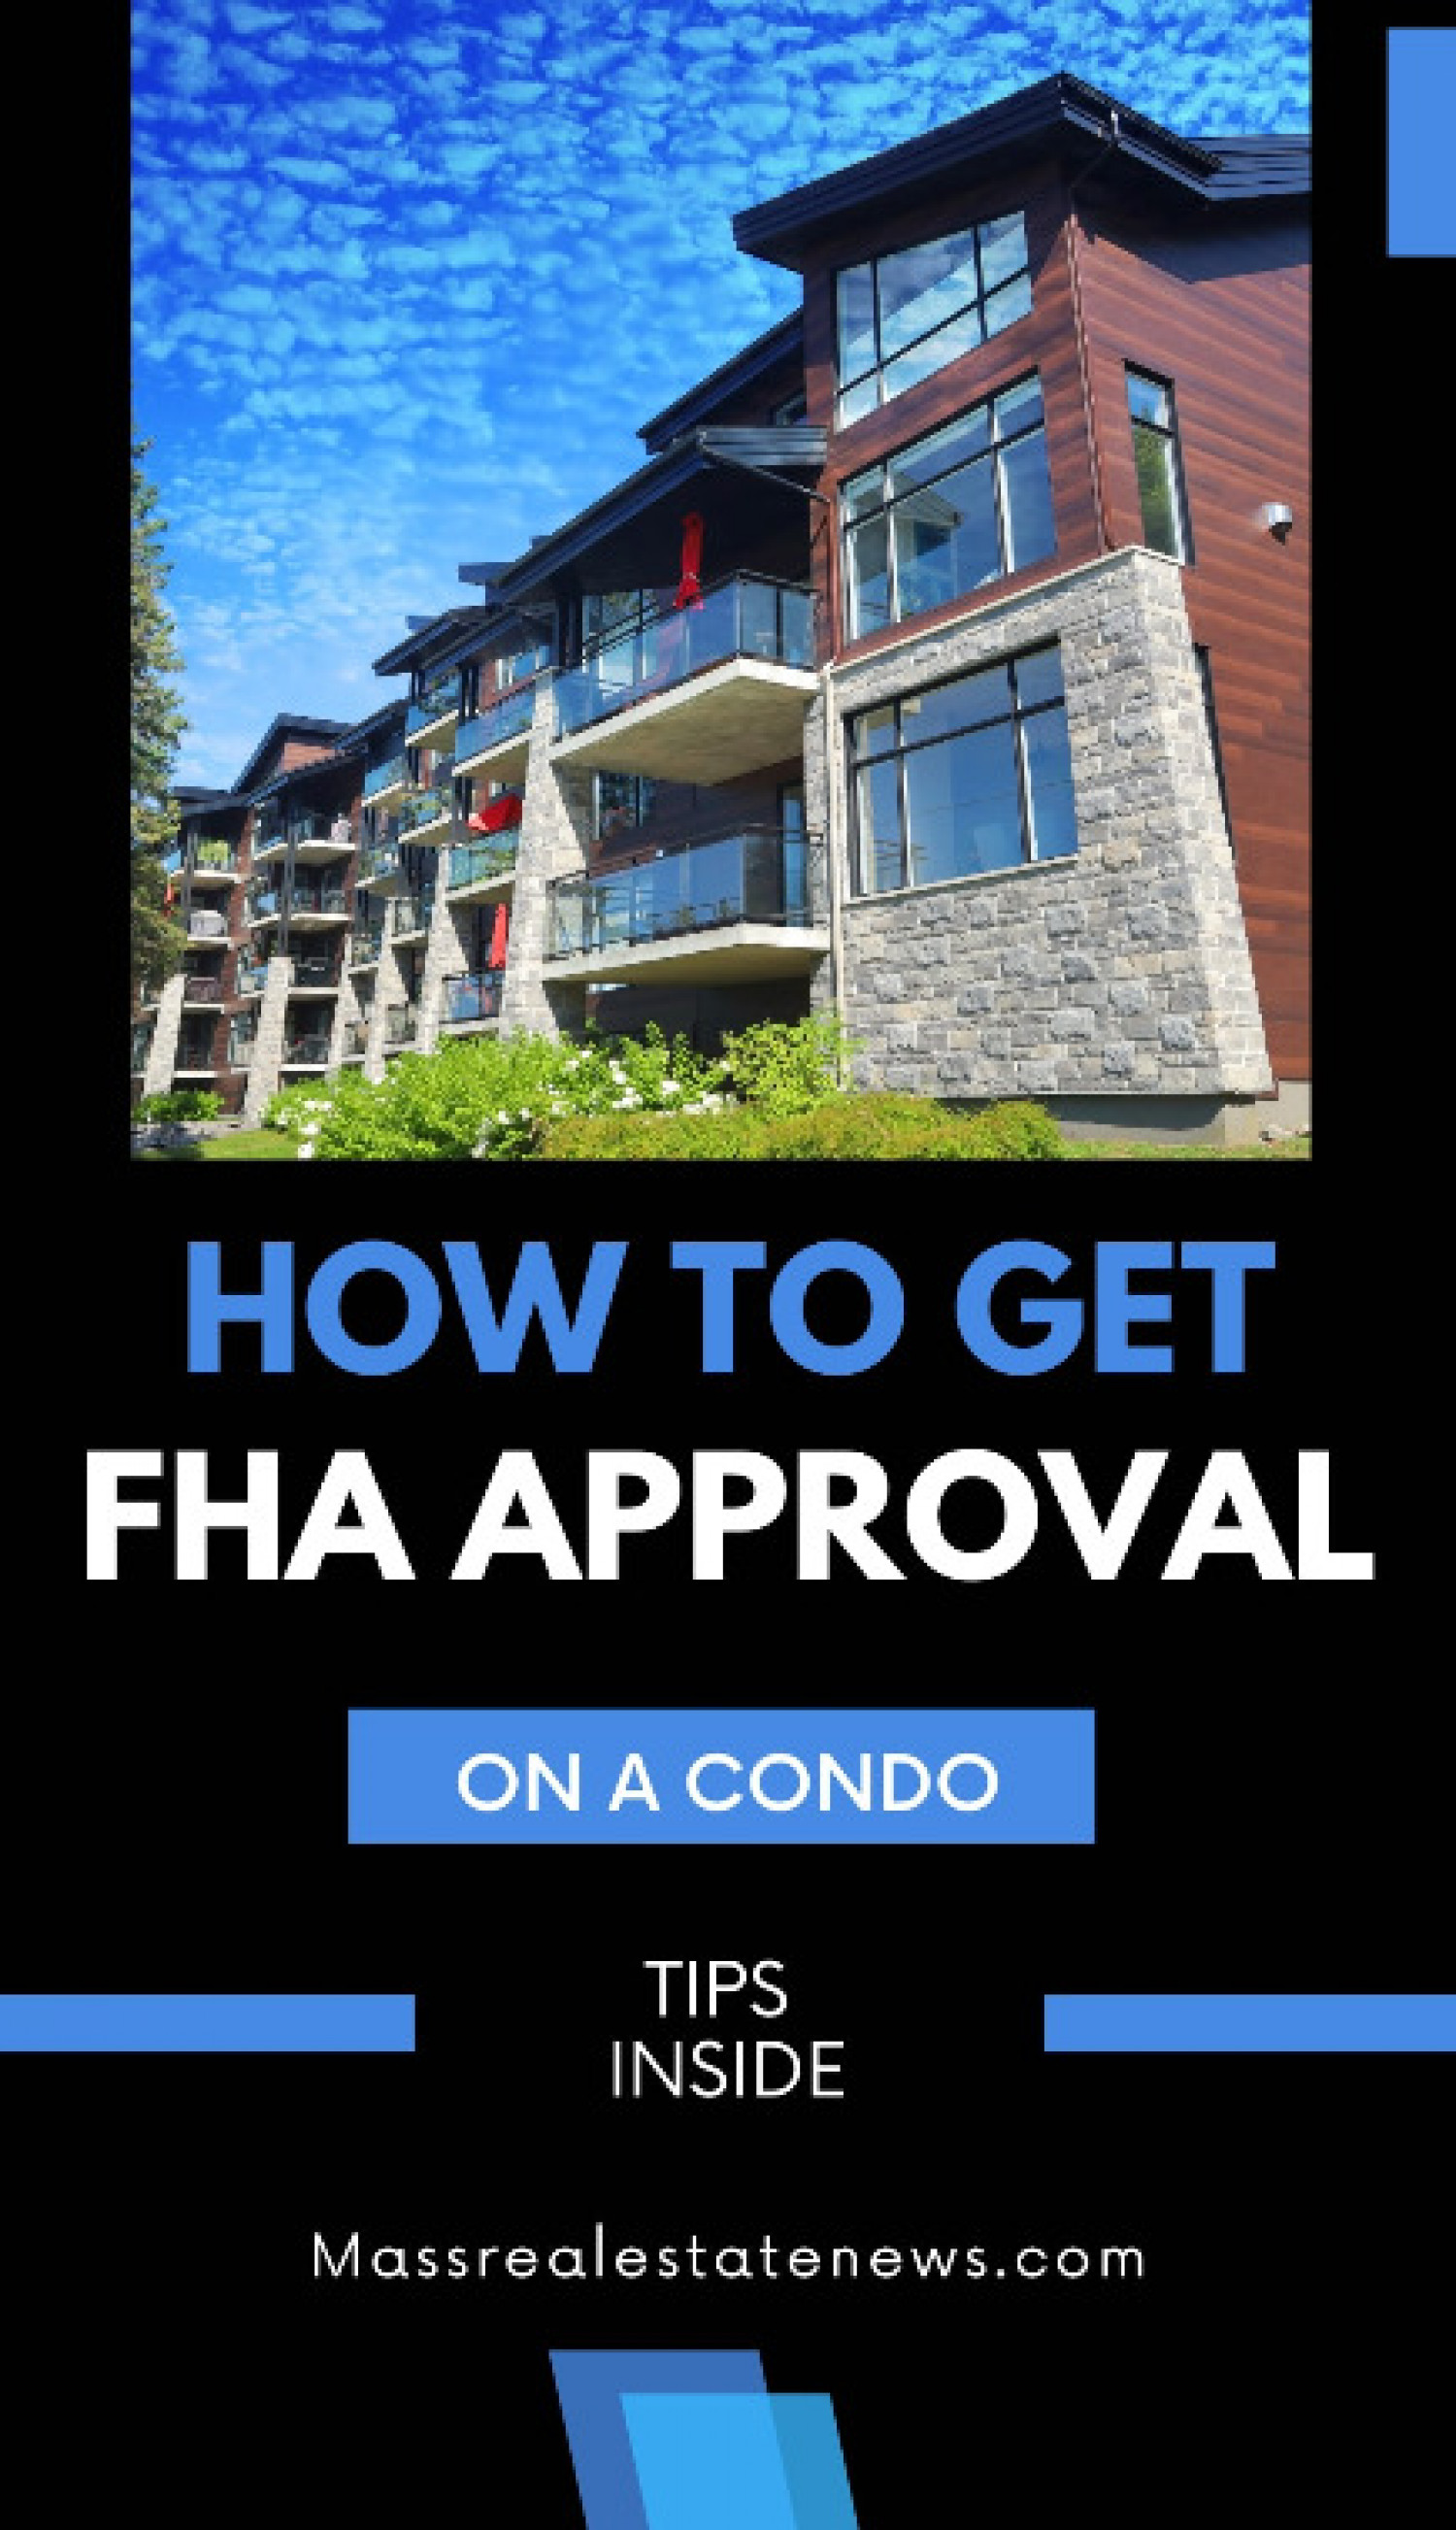 Tips For Getting FHA Approval on a Condominium Infographic